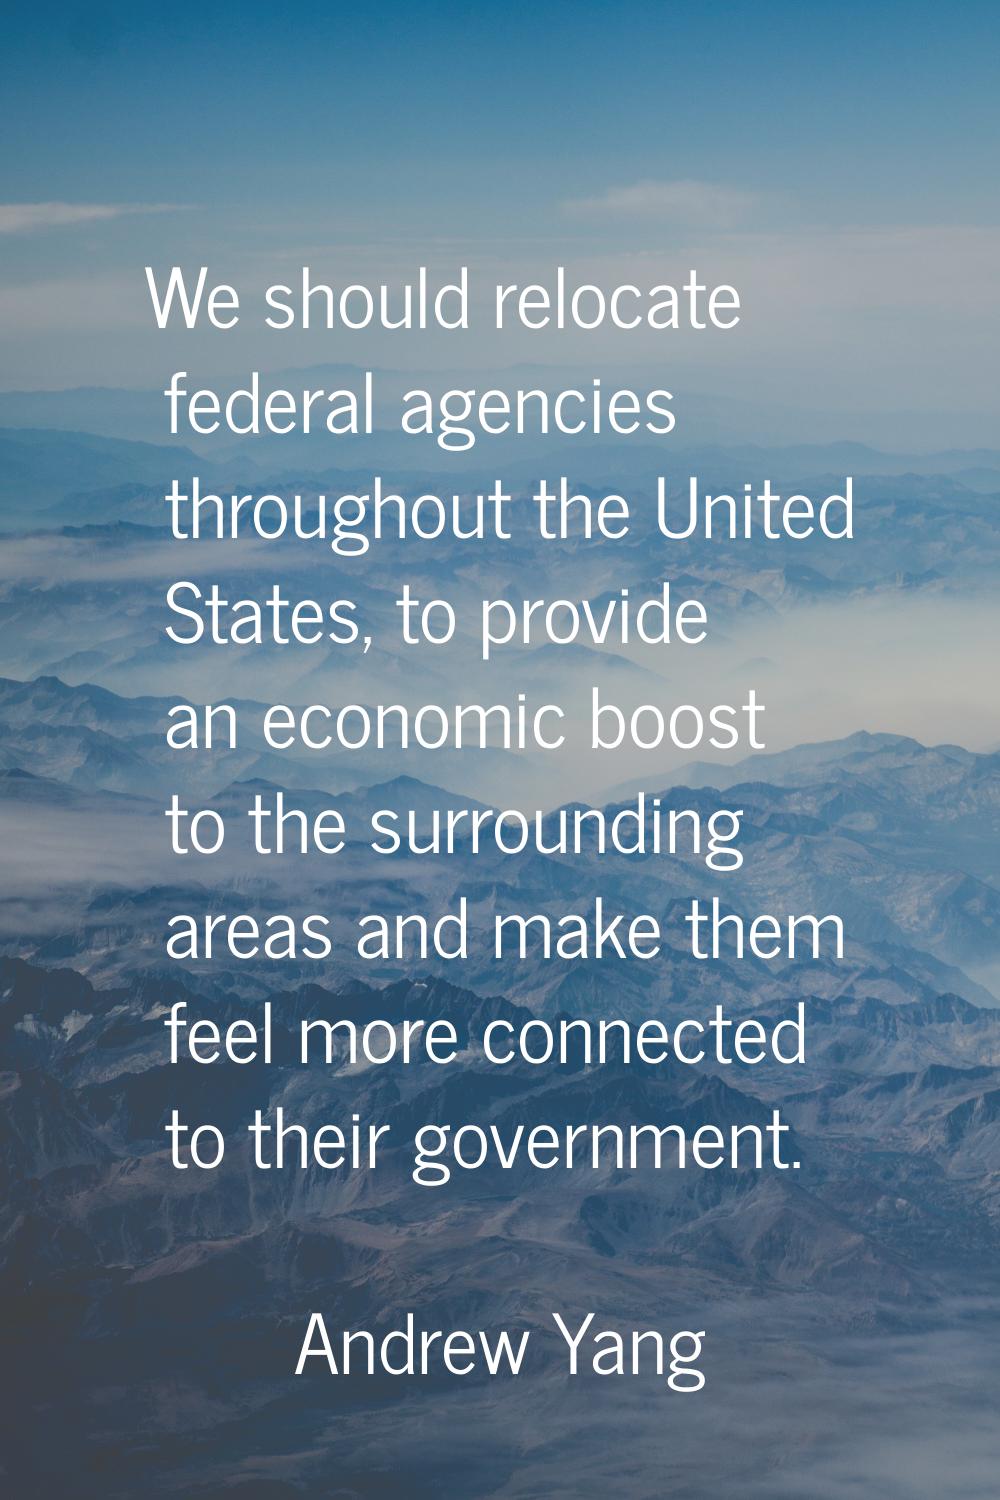 We should relocate federal agencies throughout the United States, to provide an economic boost to t